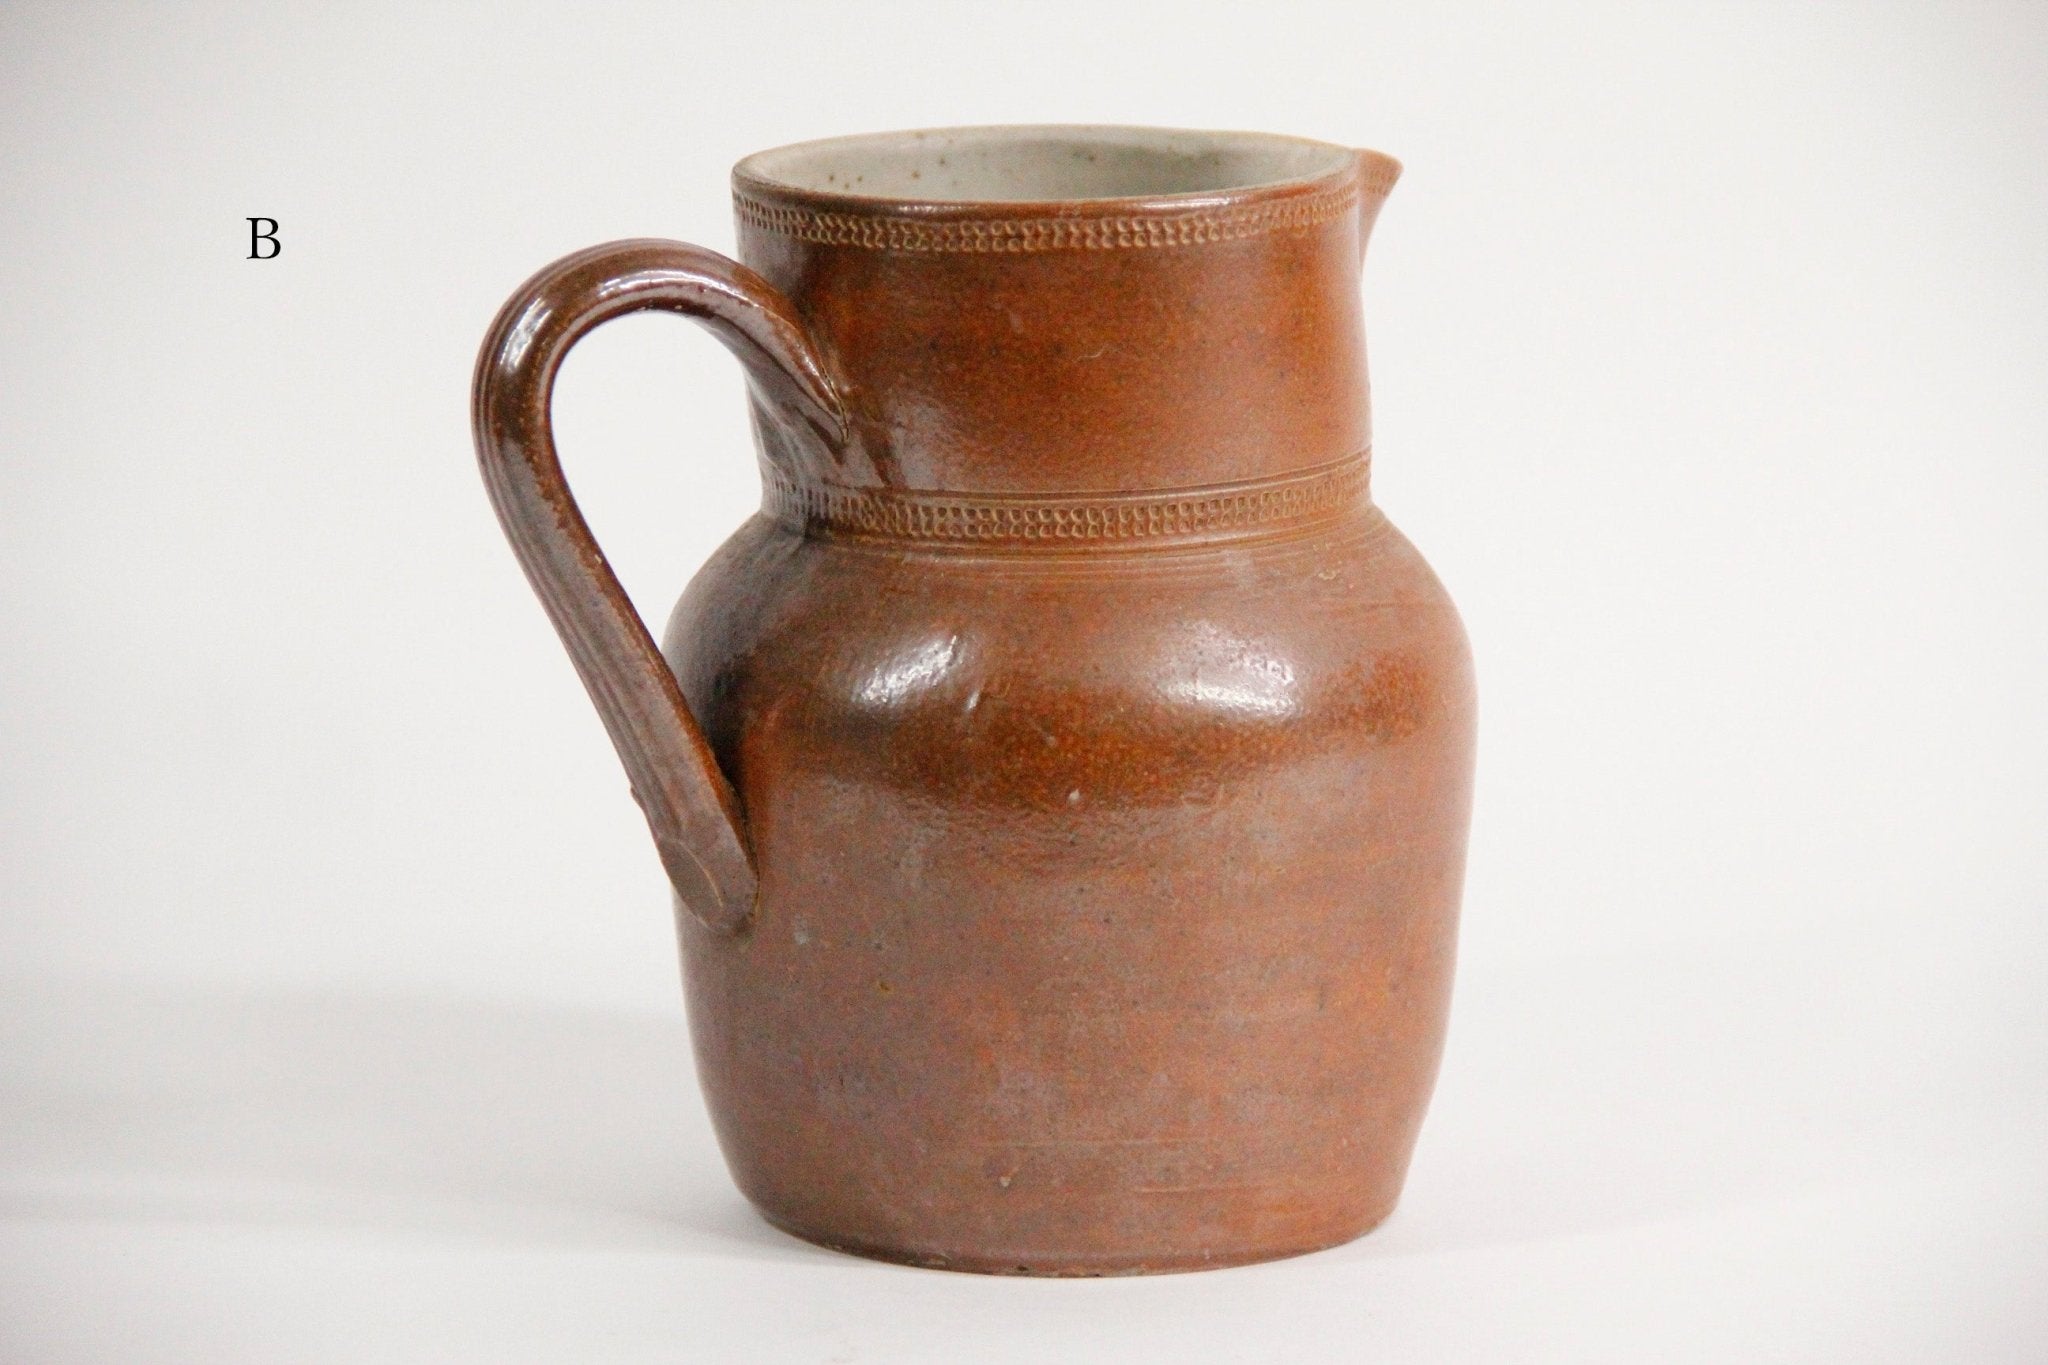 Antique French Pottery | Jug Pitcher - Debra Hall Lifestyle10